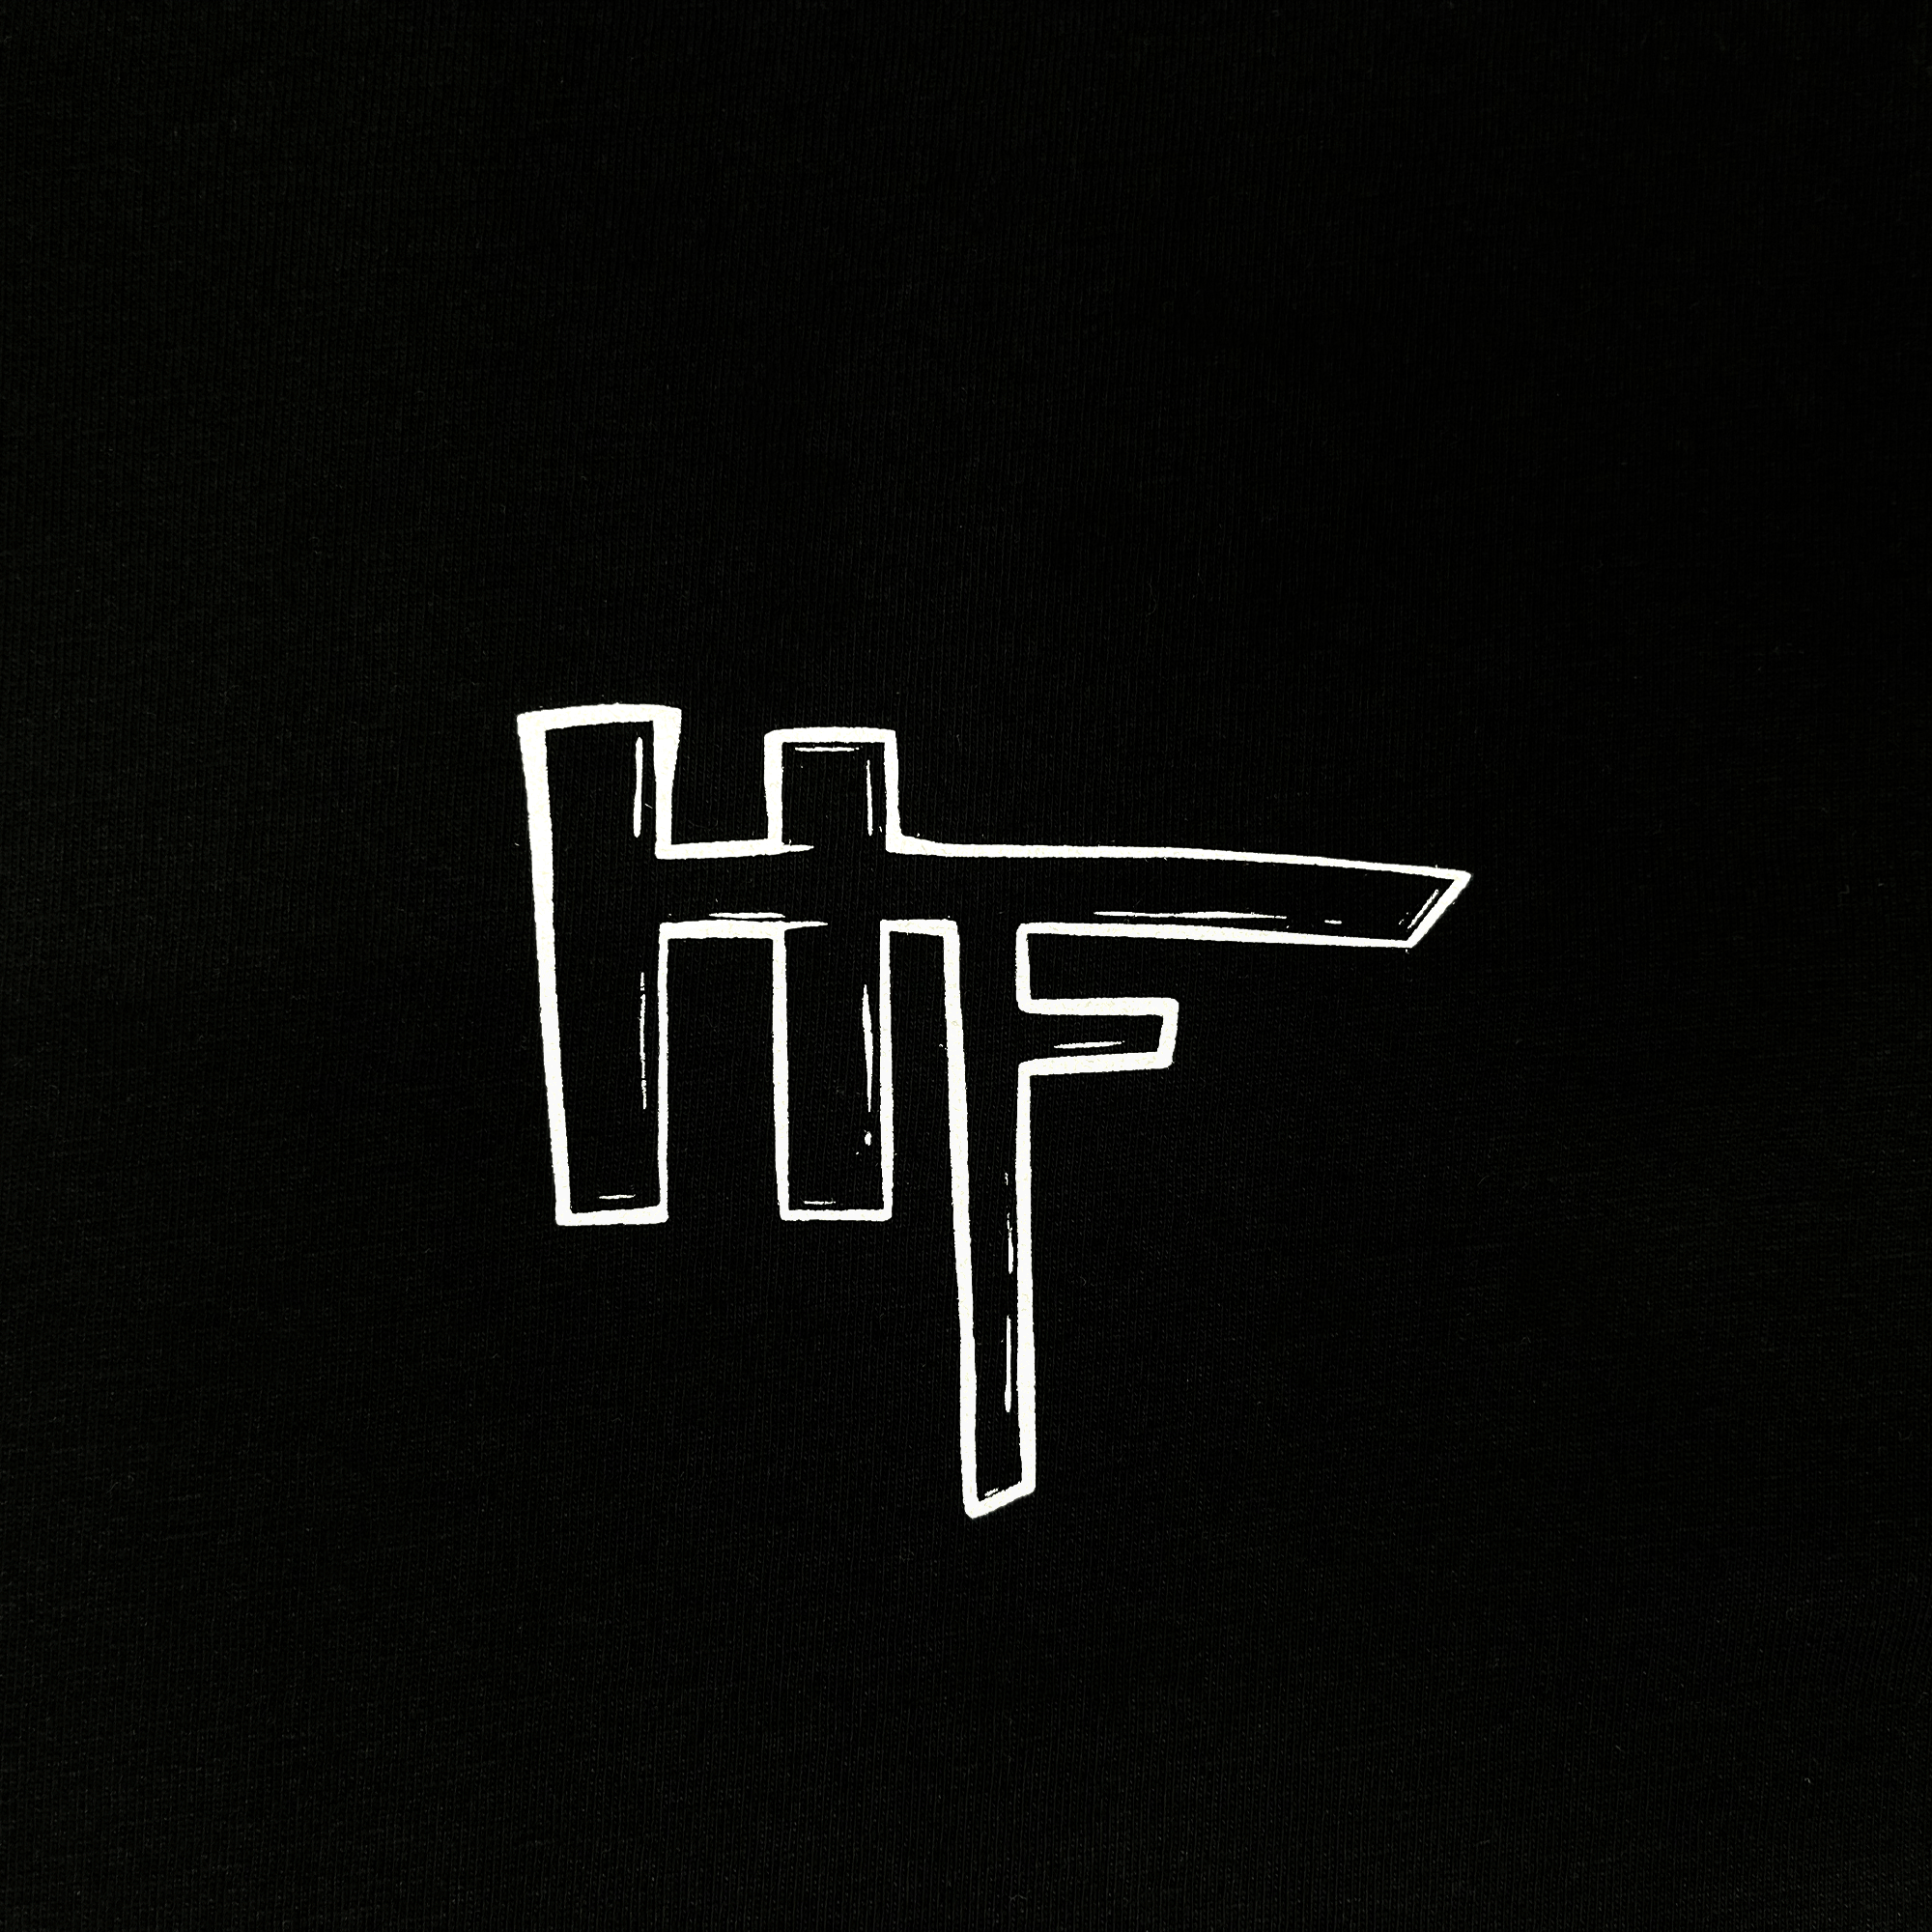 Close-up of HellaFutures logo by Oakland artist on the chest of a black t-shirt.